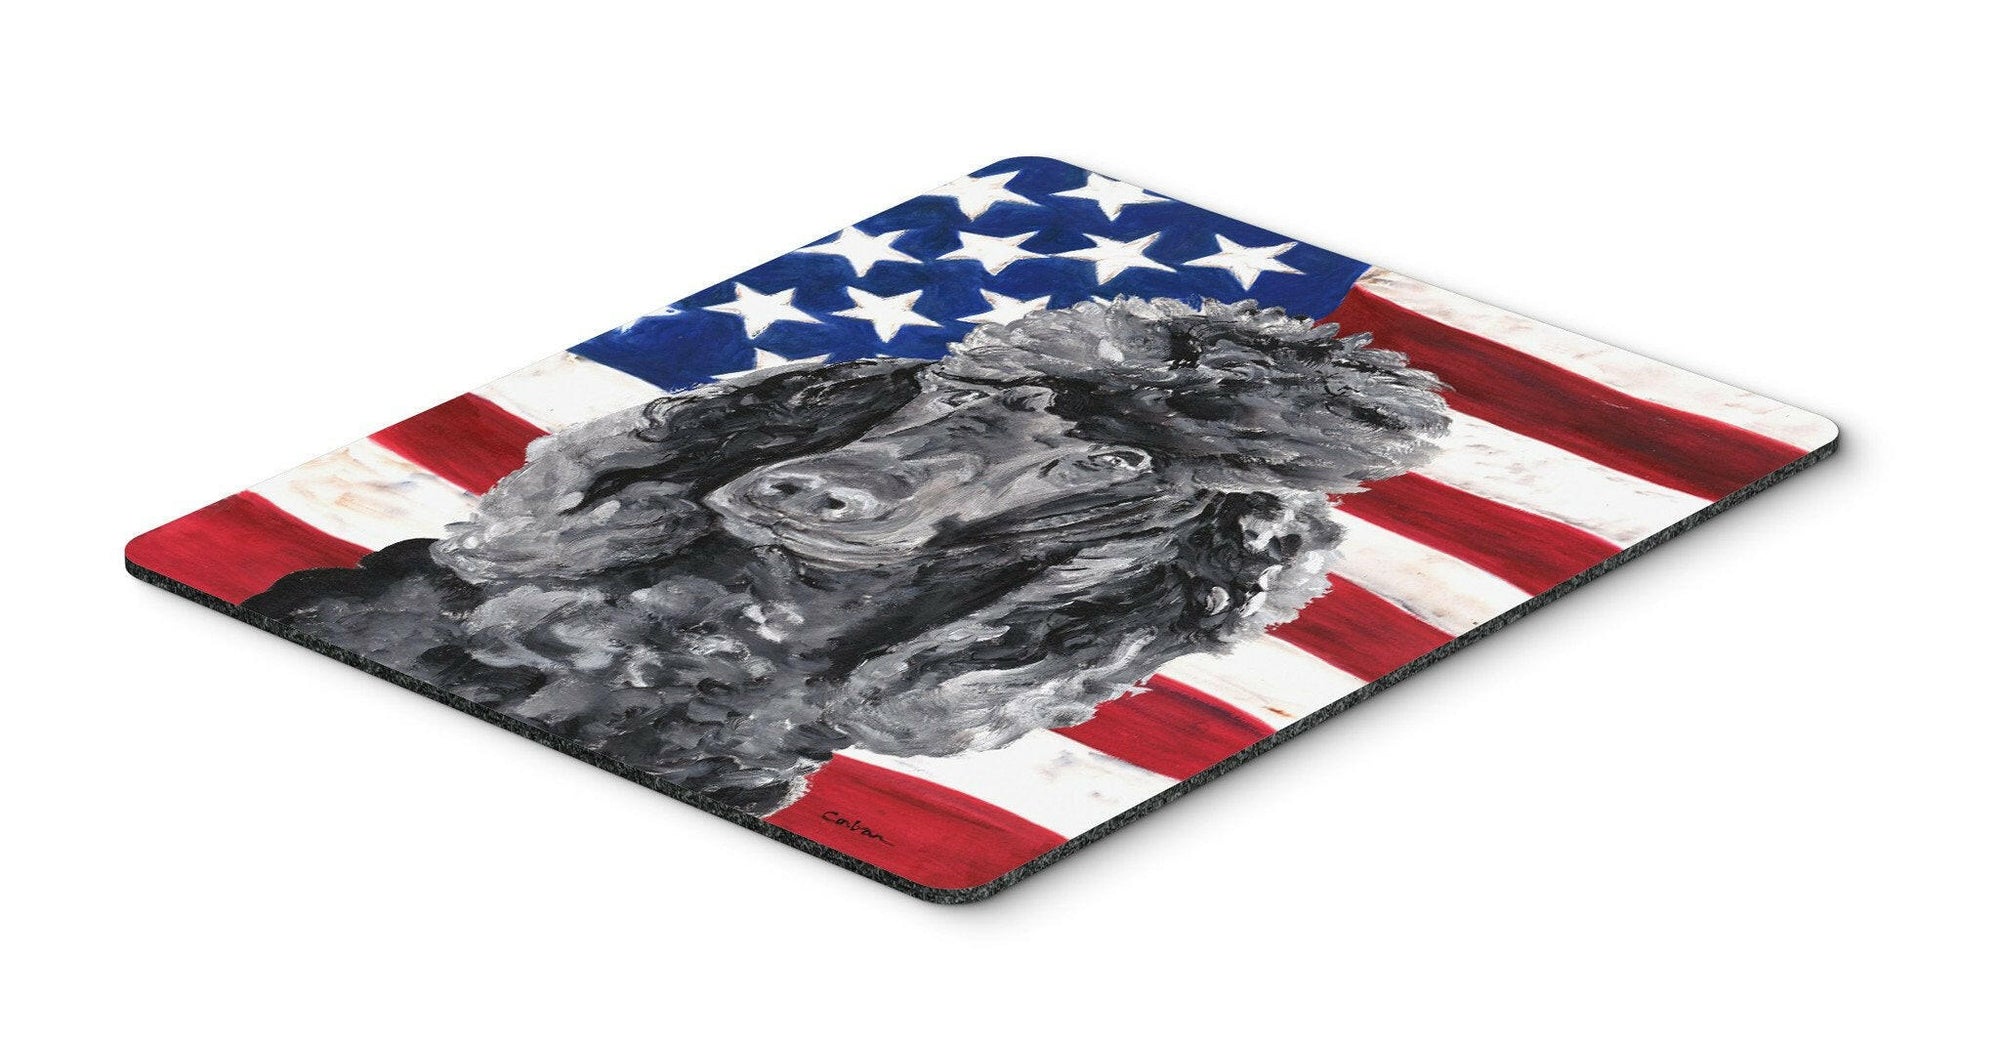 Black Standard Poodle with American Flag USA Mouse Pad, Hot Pad or Trivet SC9626MP by Caroline's Treasures